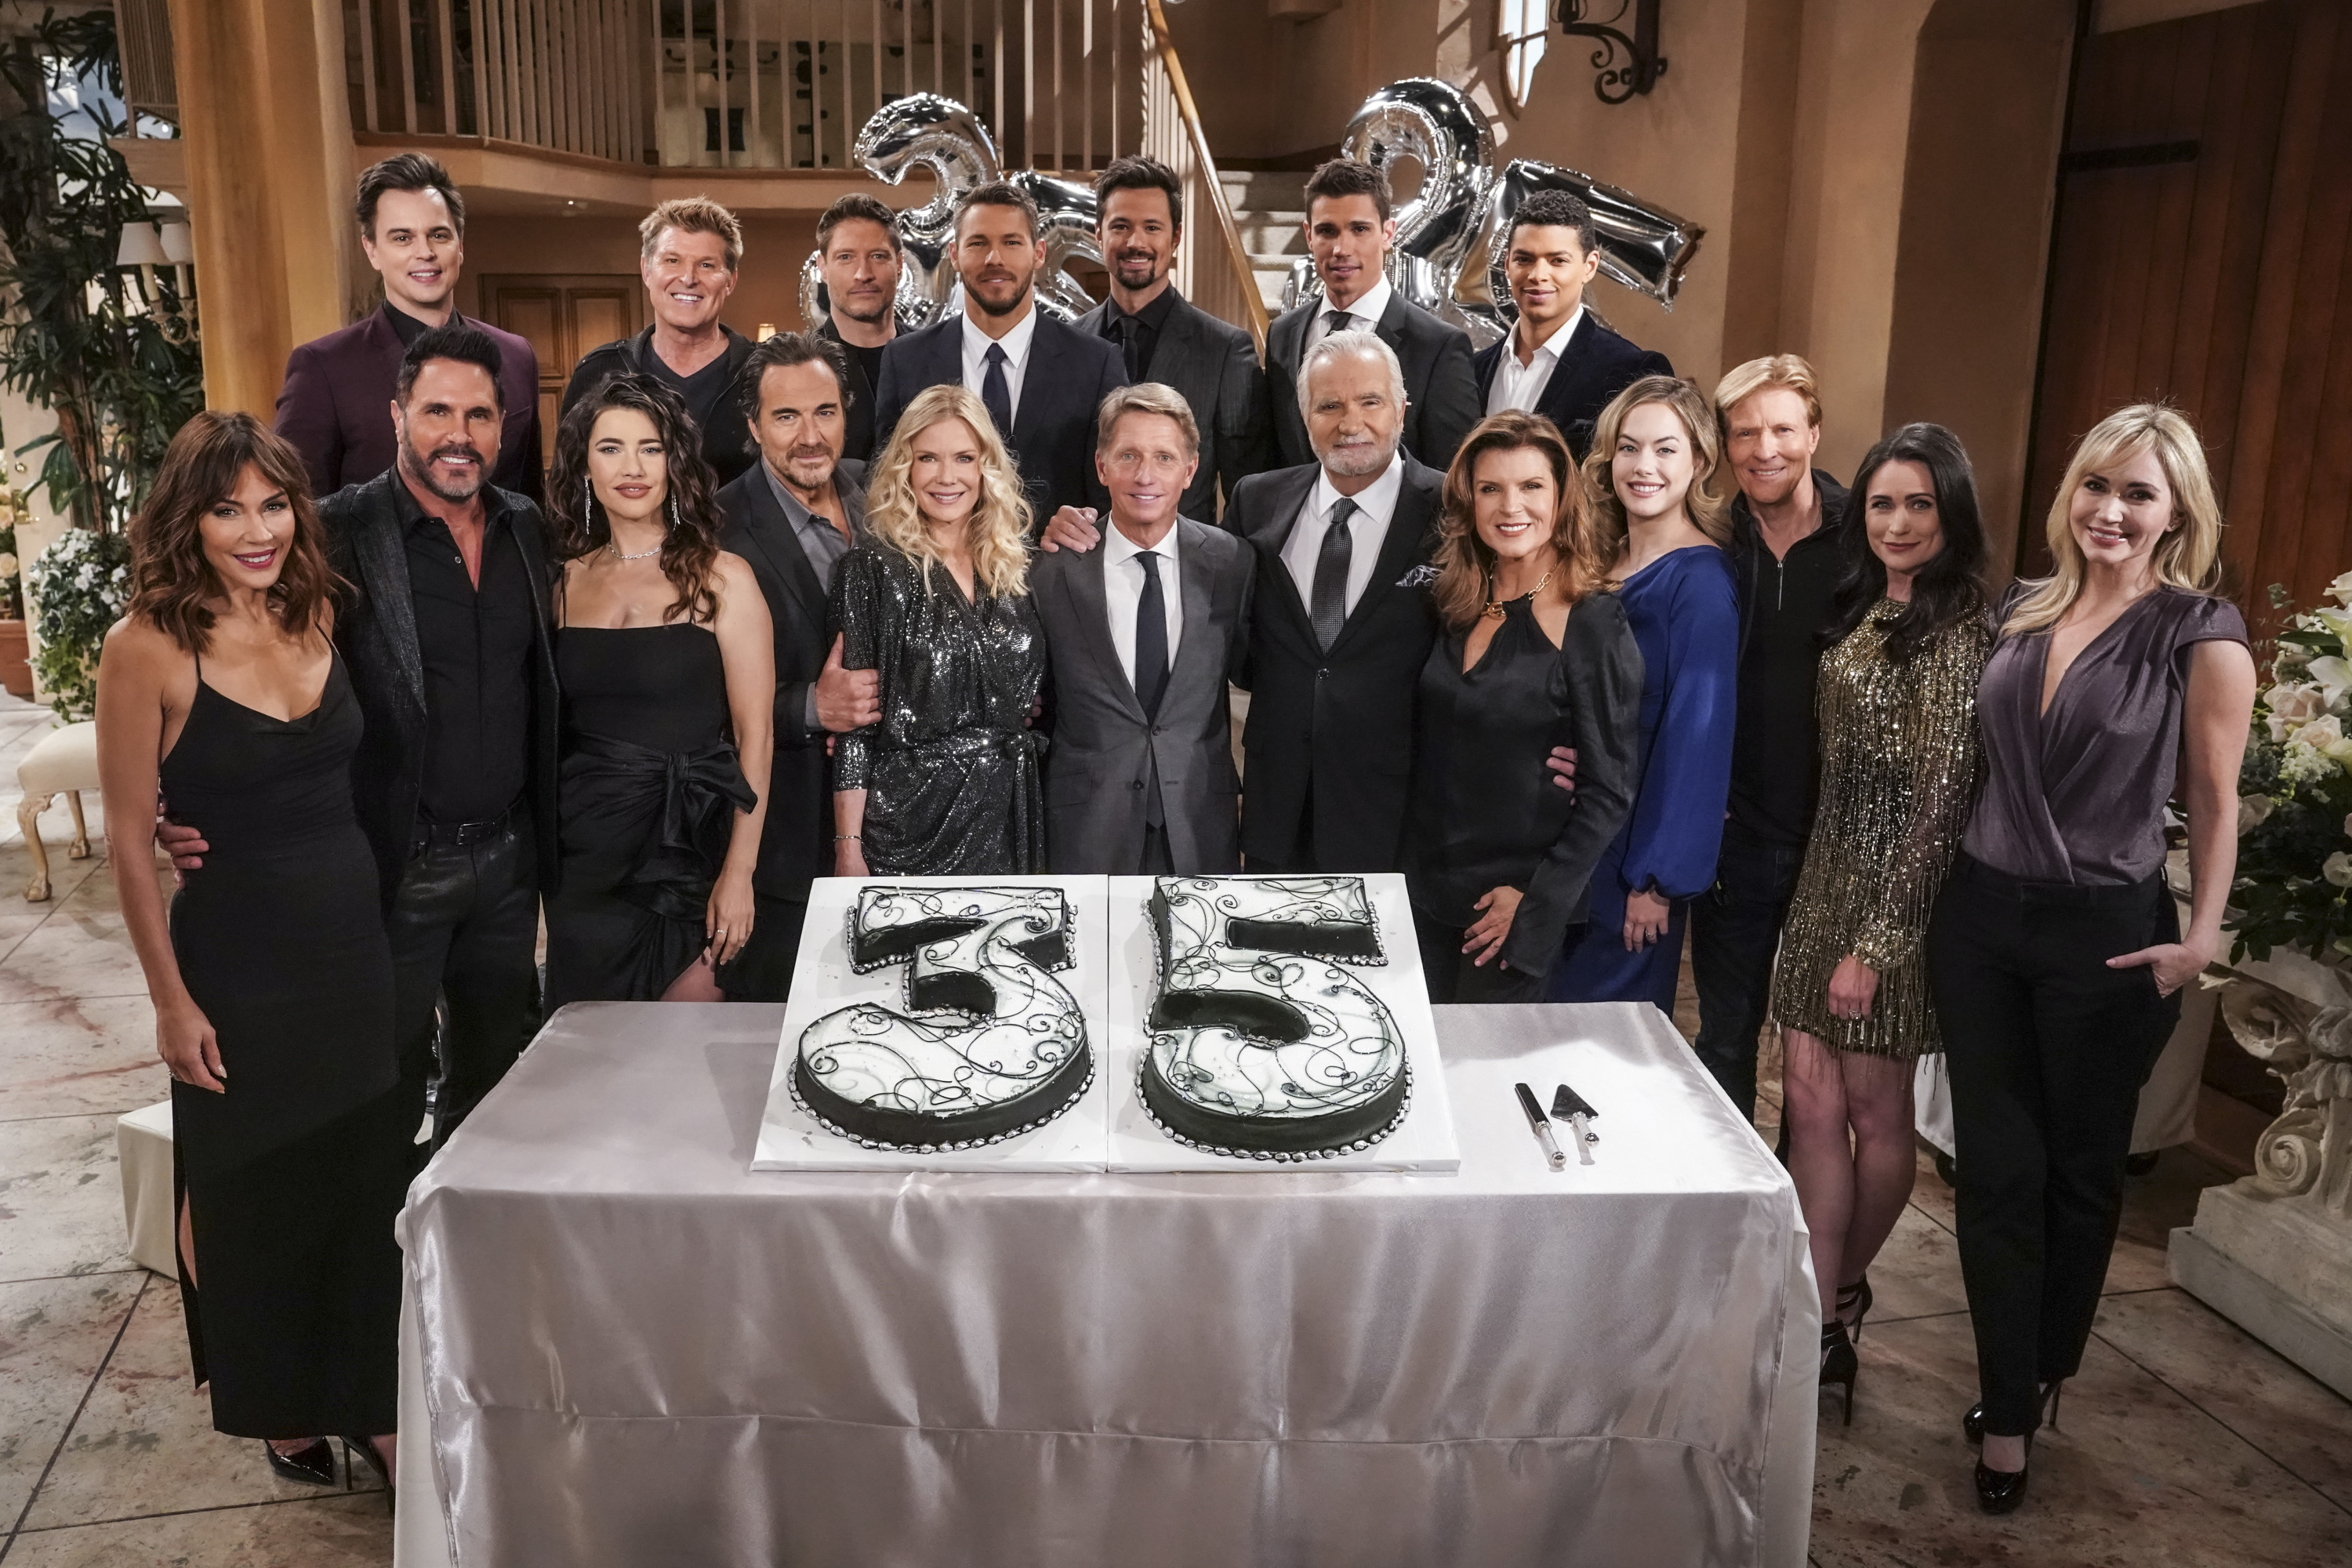 'The Bold and the Beautiful' cast on set, celebrating the show's 35th anniversary with a cake.